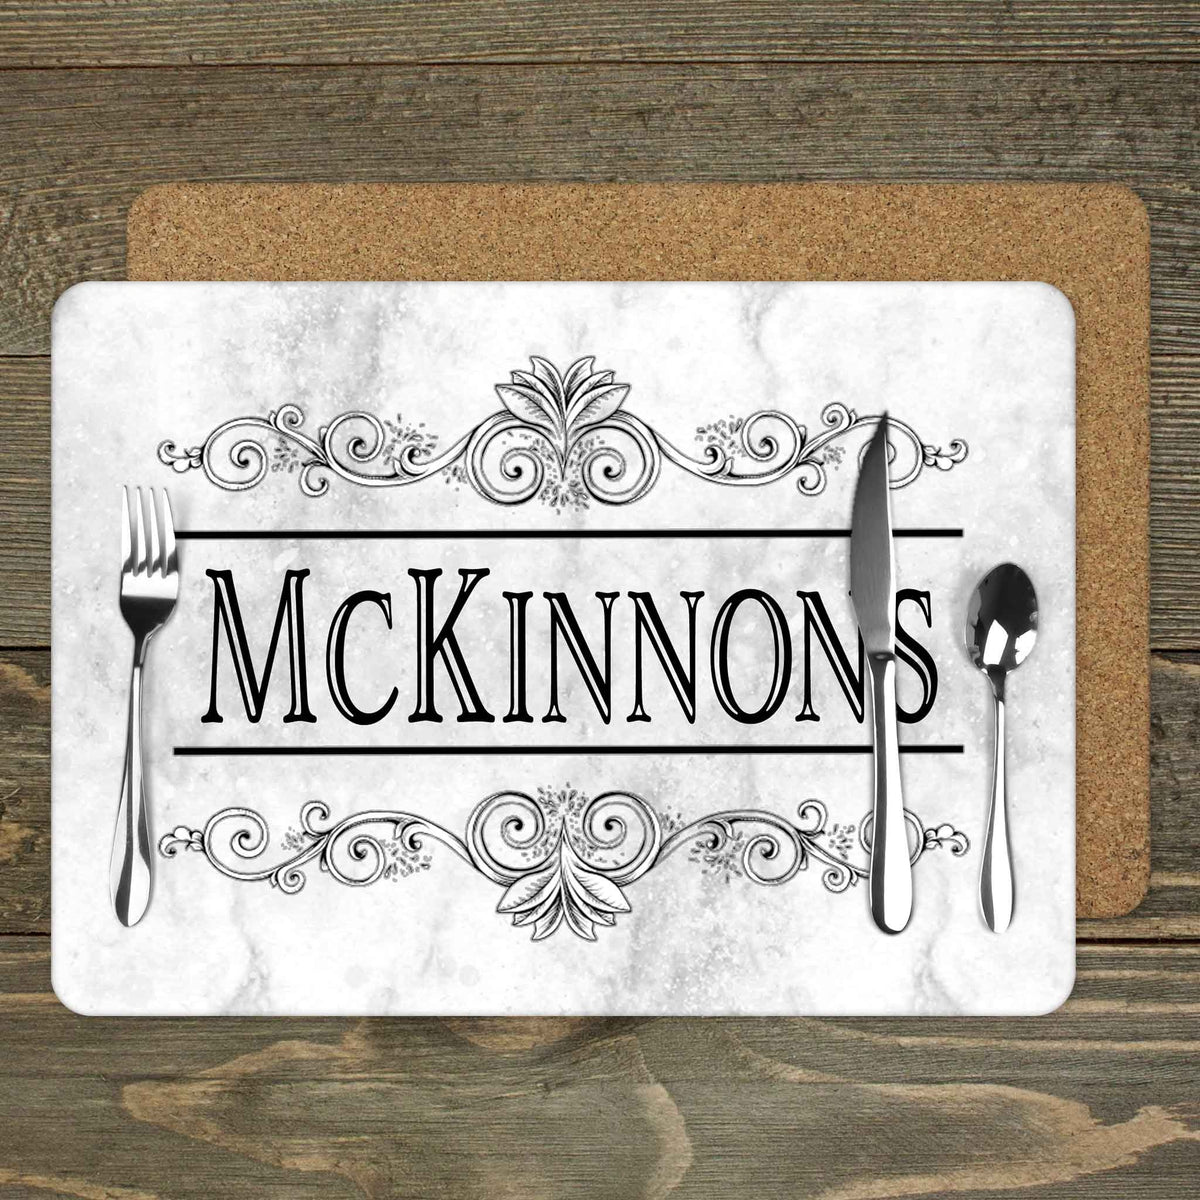 Custom Placemats | Personalized Dining and Serving | Decorative Vine